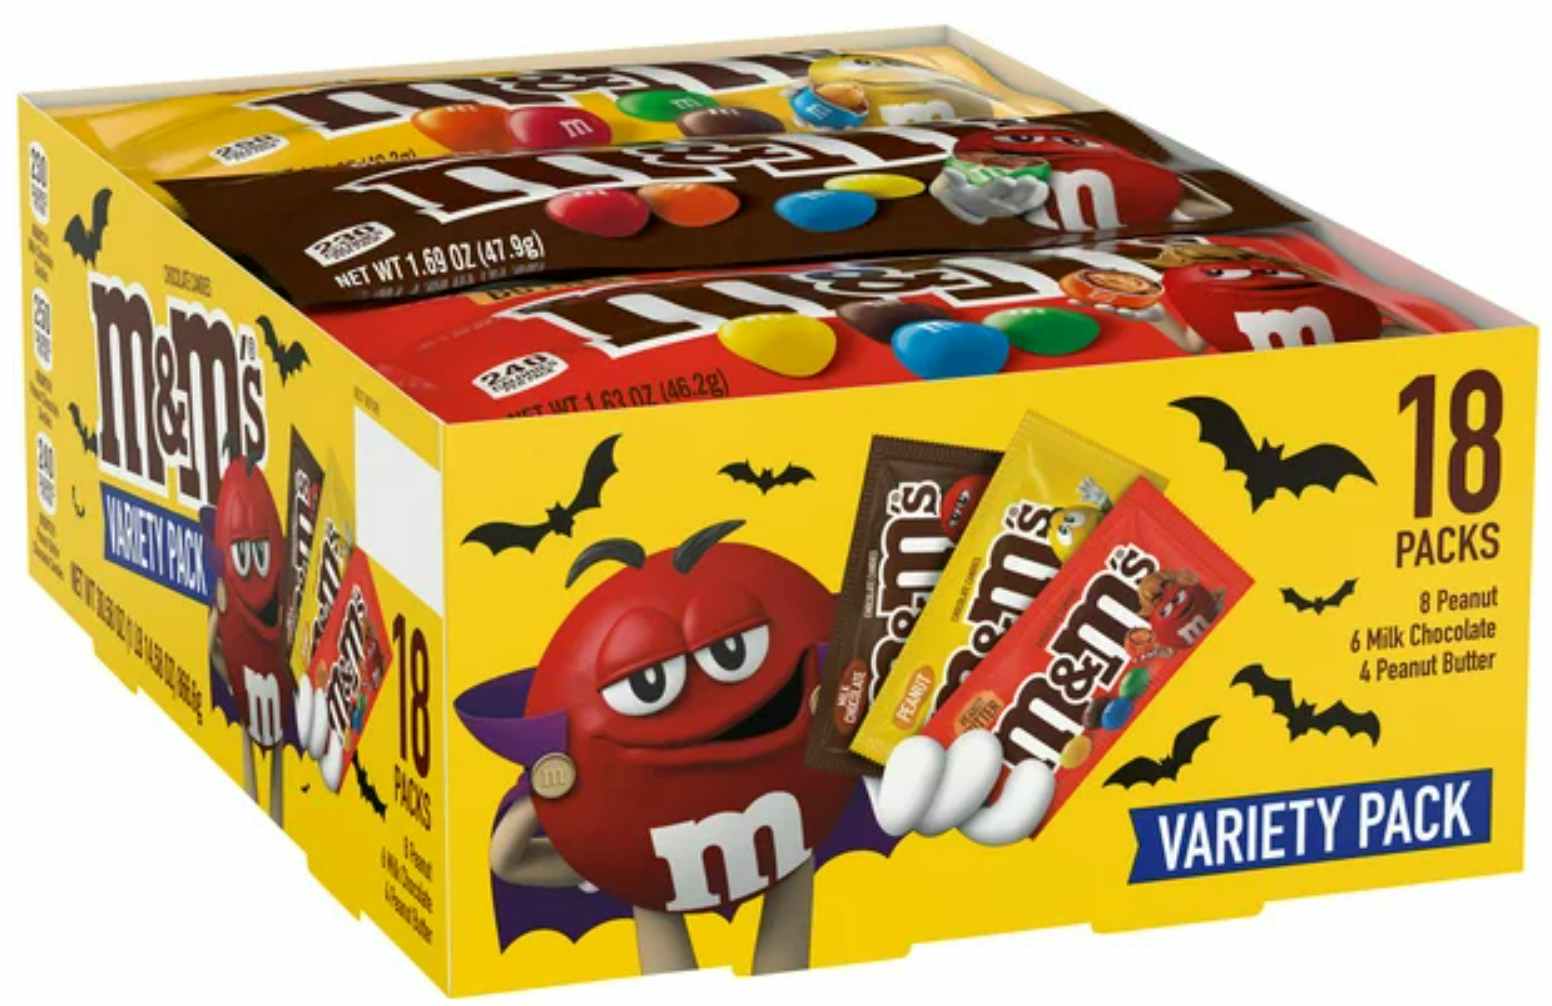 M&M Full size candy bars